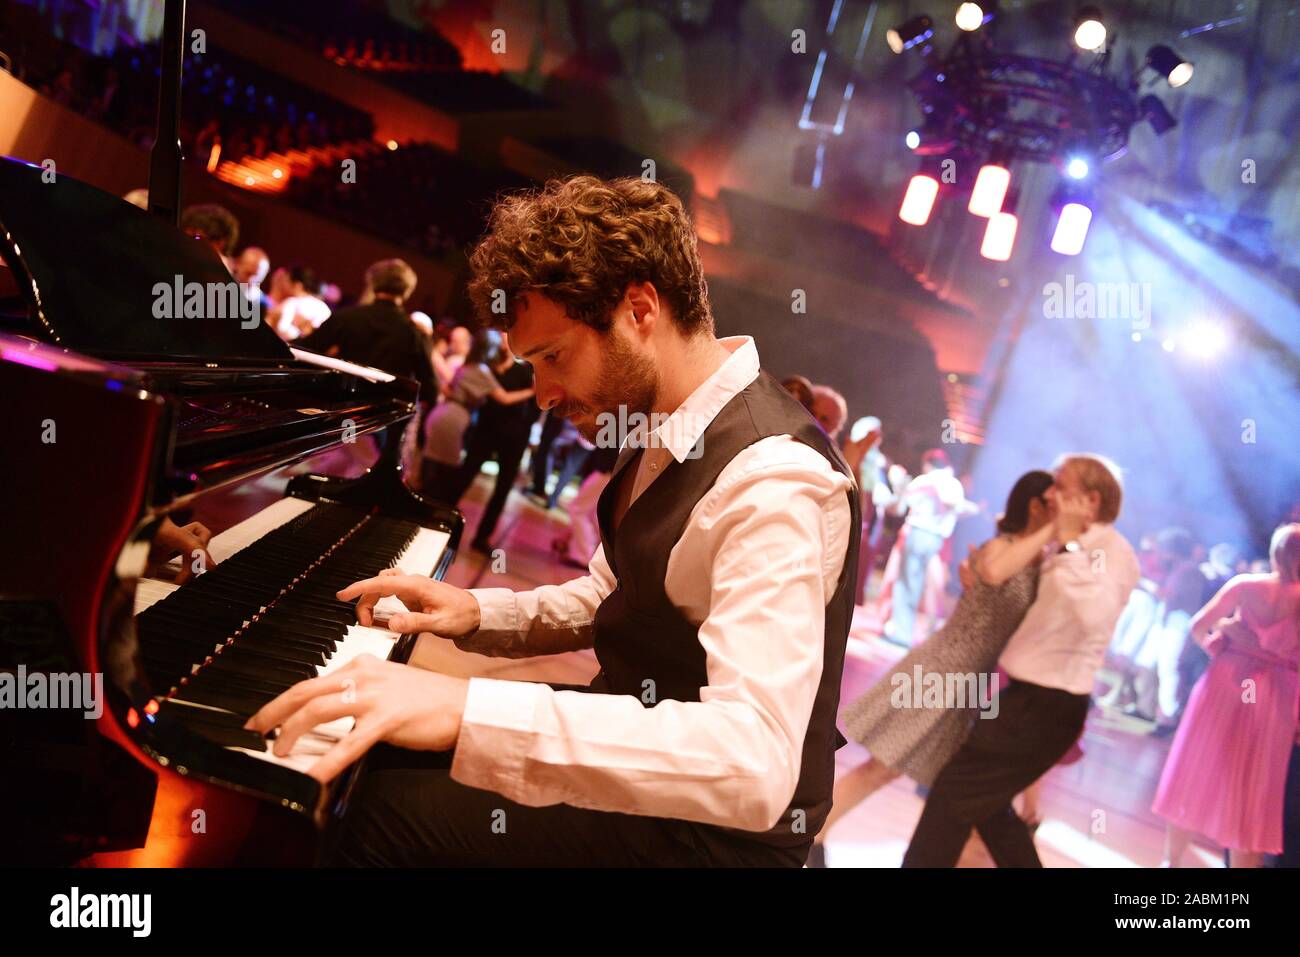 A piano player during his performance at the Gasteig during the event 'Tanz den Gasteig'. [automated translation] Stock Photo